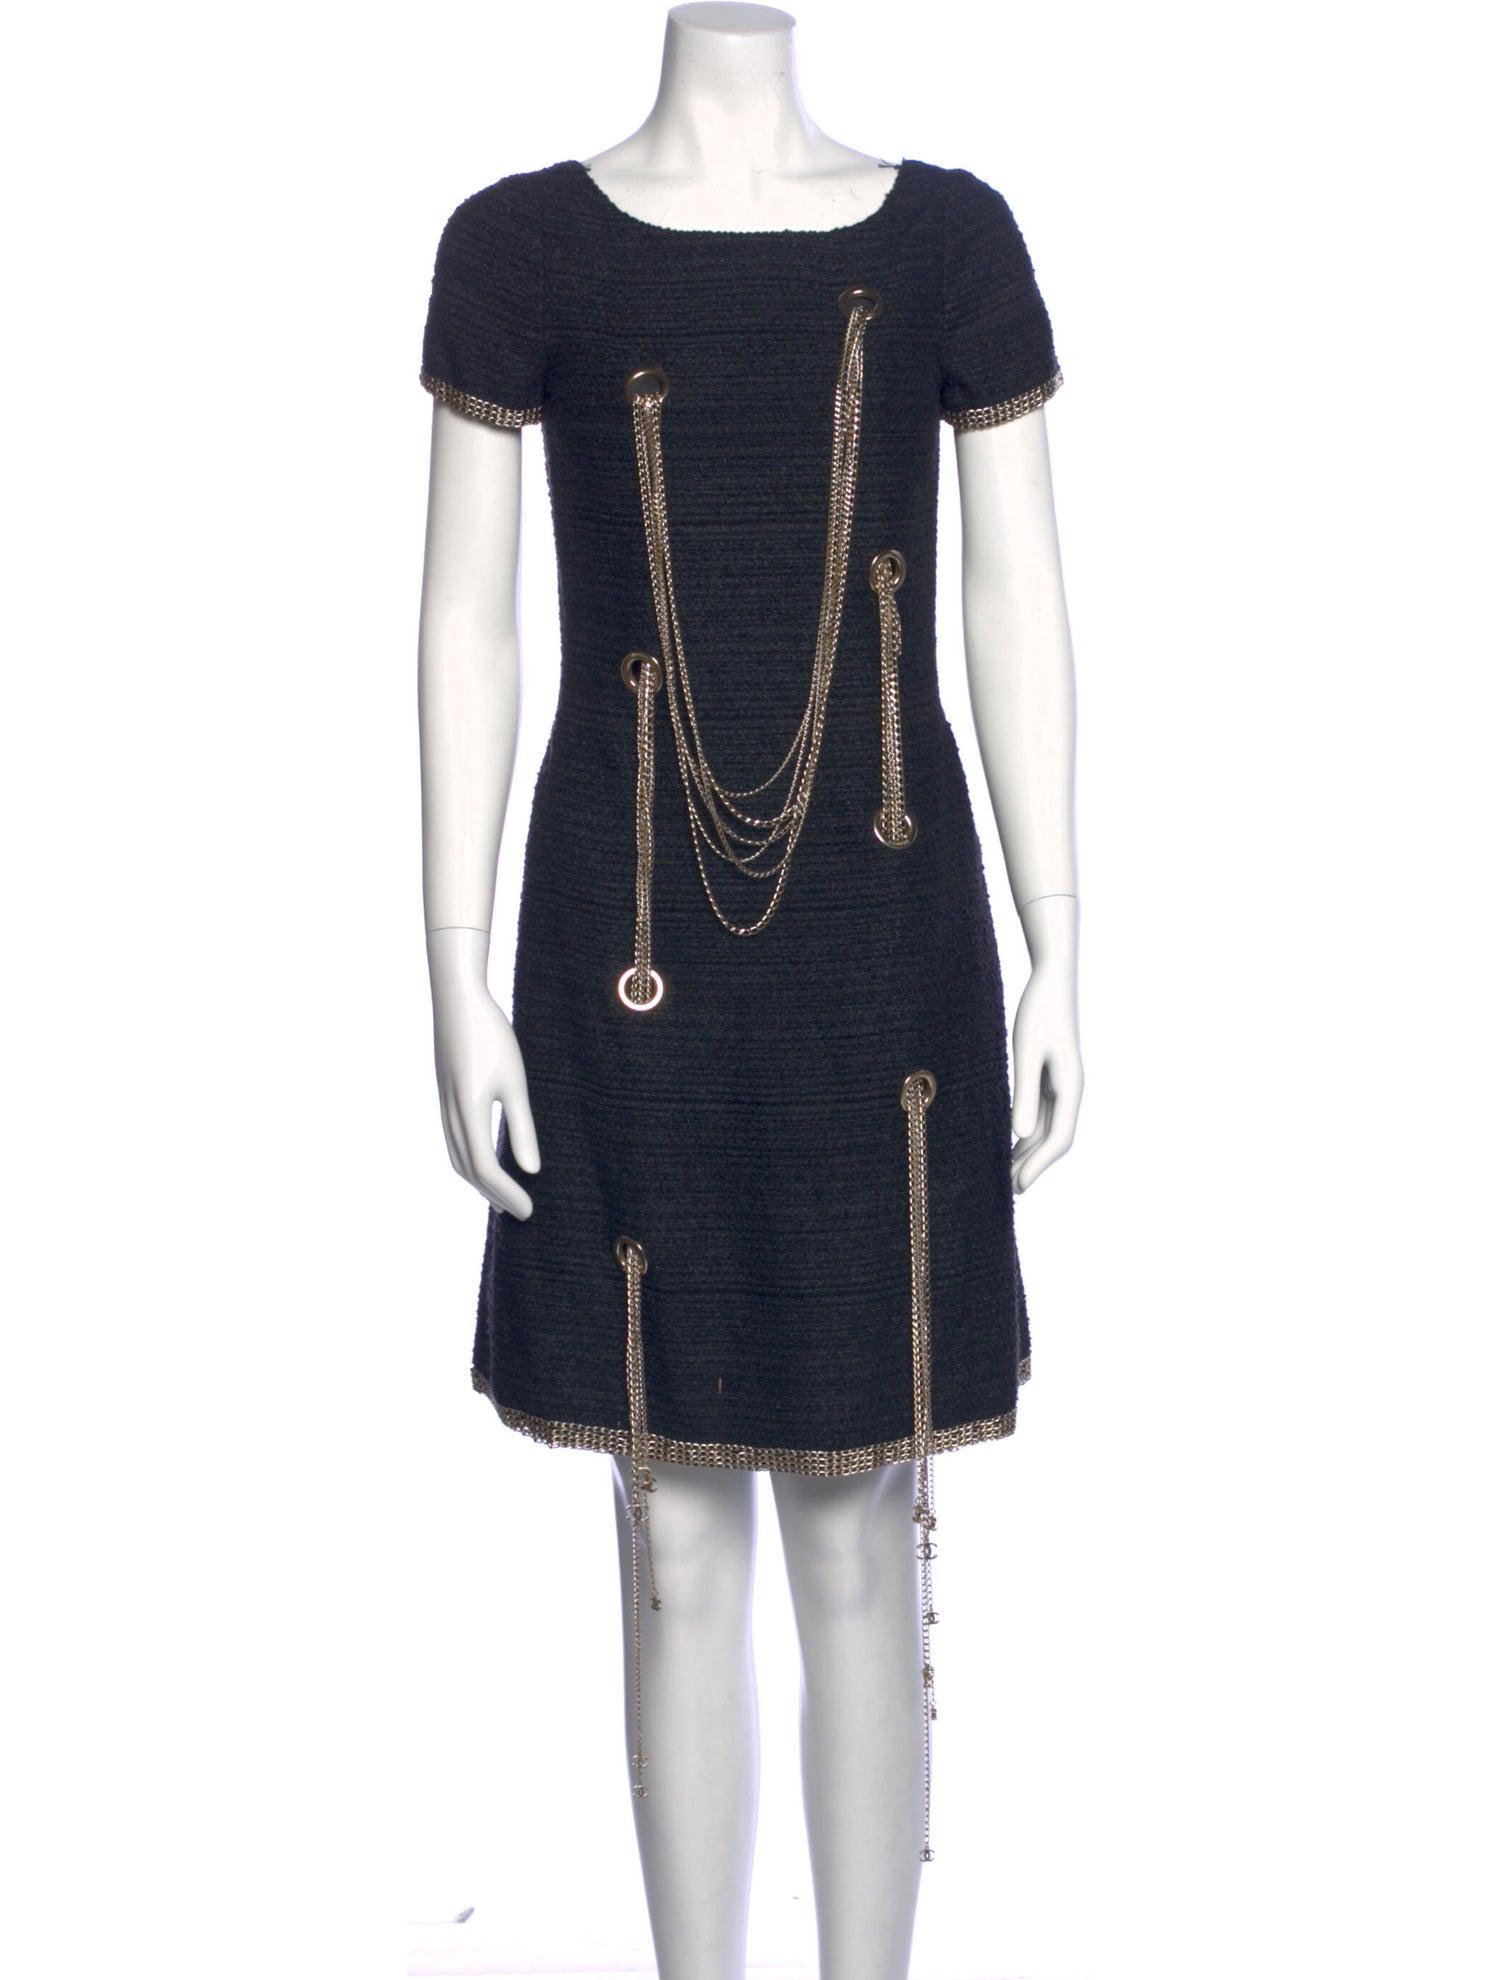 Women's Chanel Dress With CC Chains 2008 Runway By  Karl Lagerfeld  Size 34FR